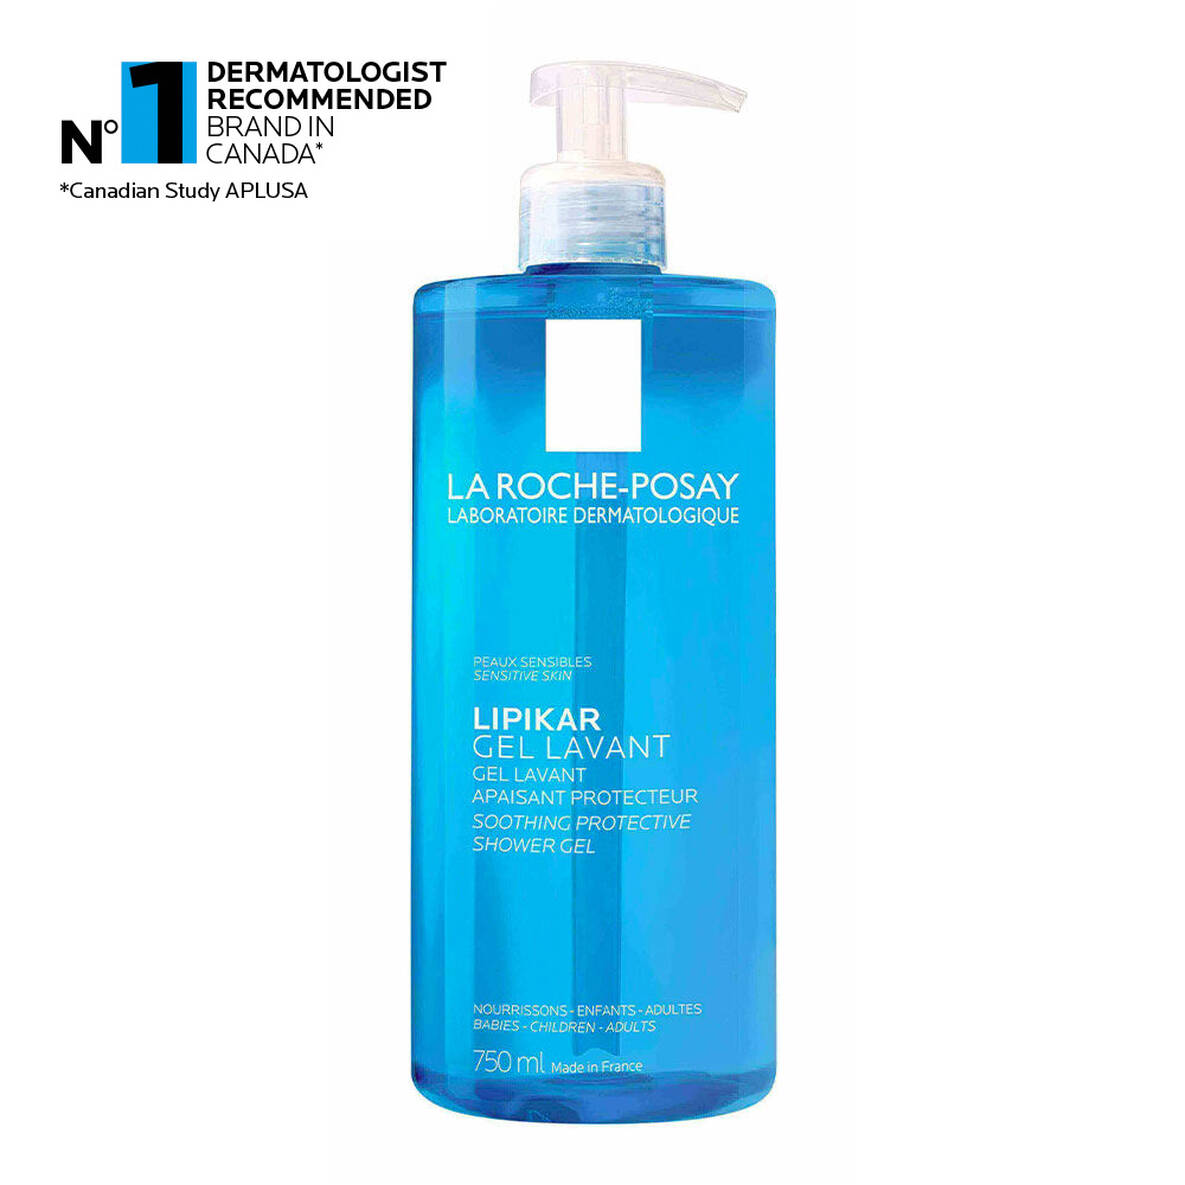 La Roche-Posay Soothing Protecting Shower Gel